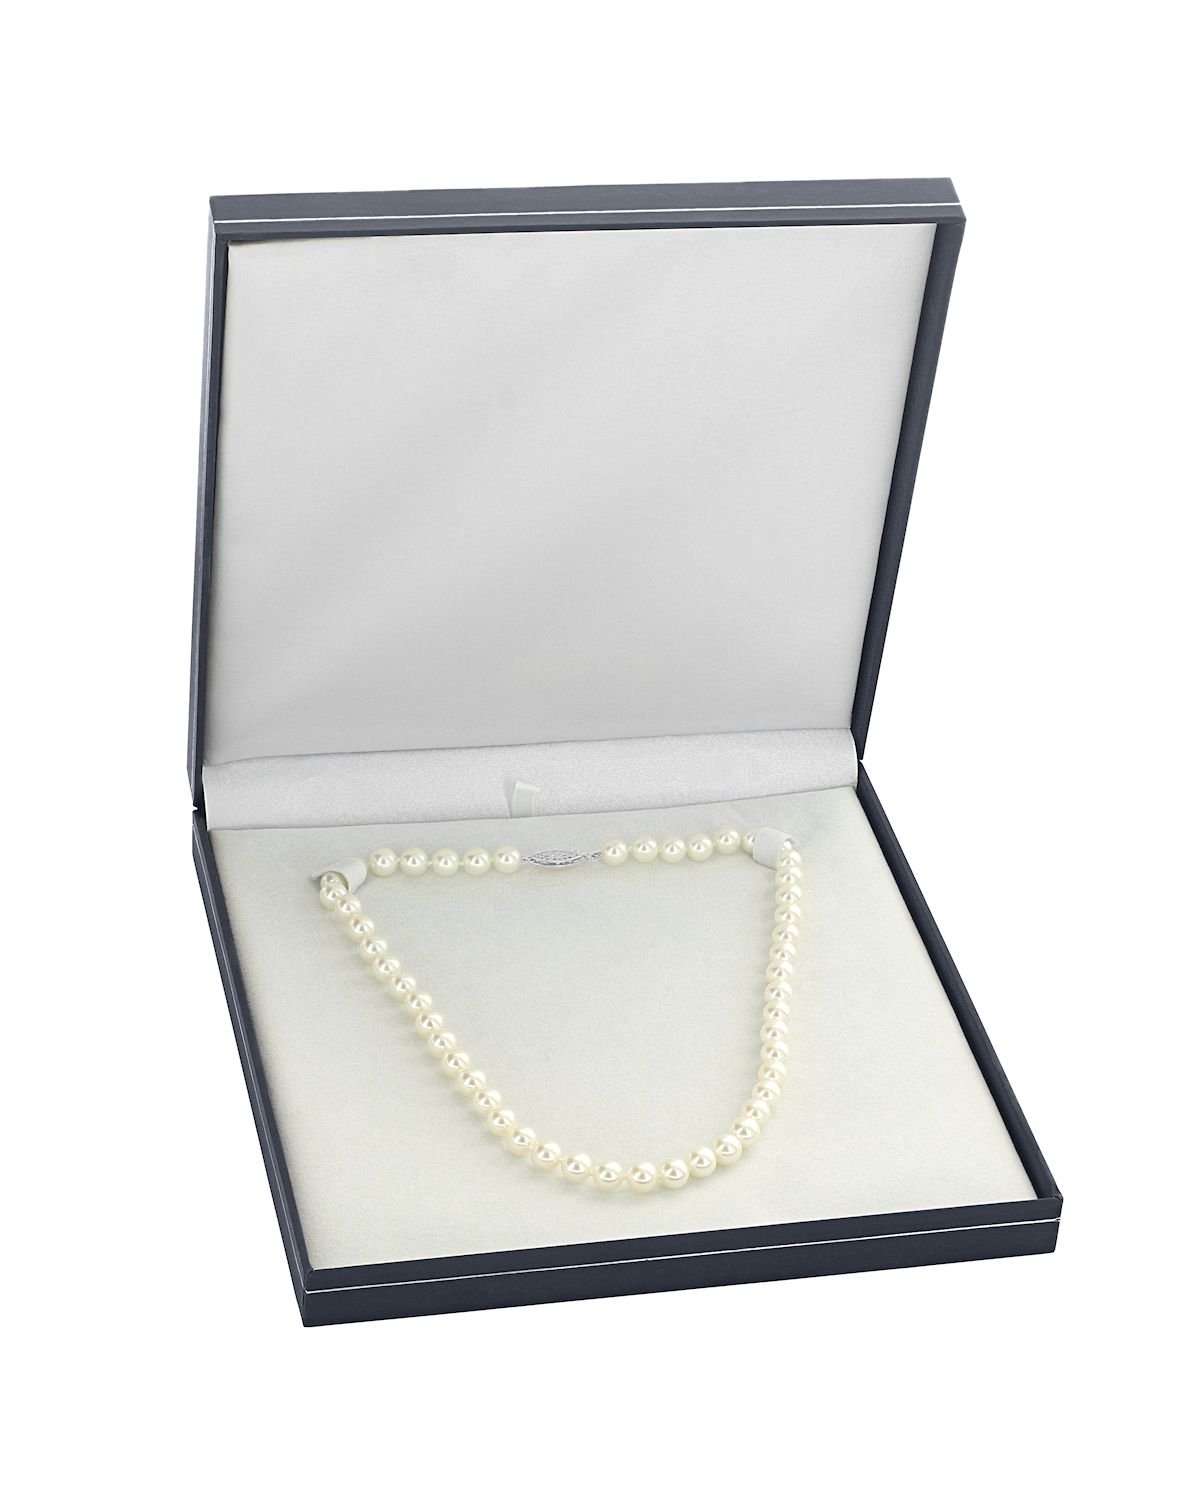 7.5-8.0mm Japanese Akoya White Pearl Necklace- AAA Quality - Third Image